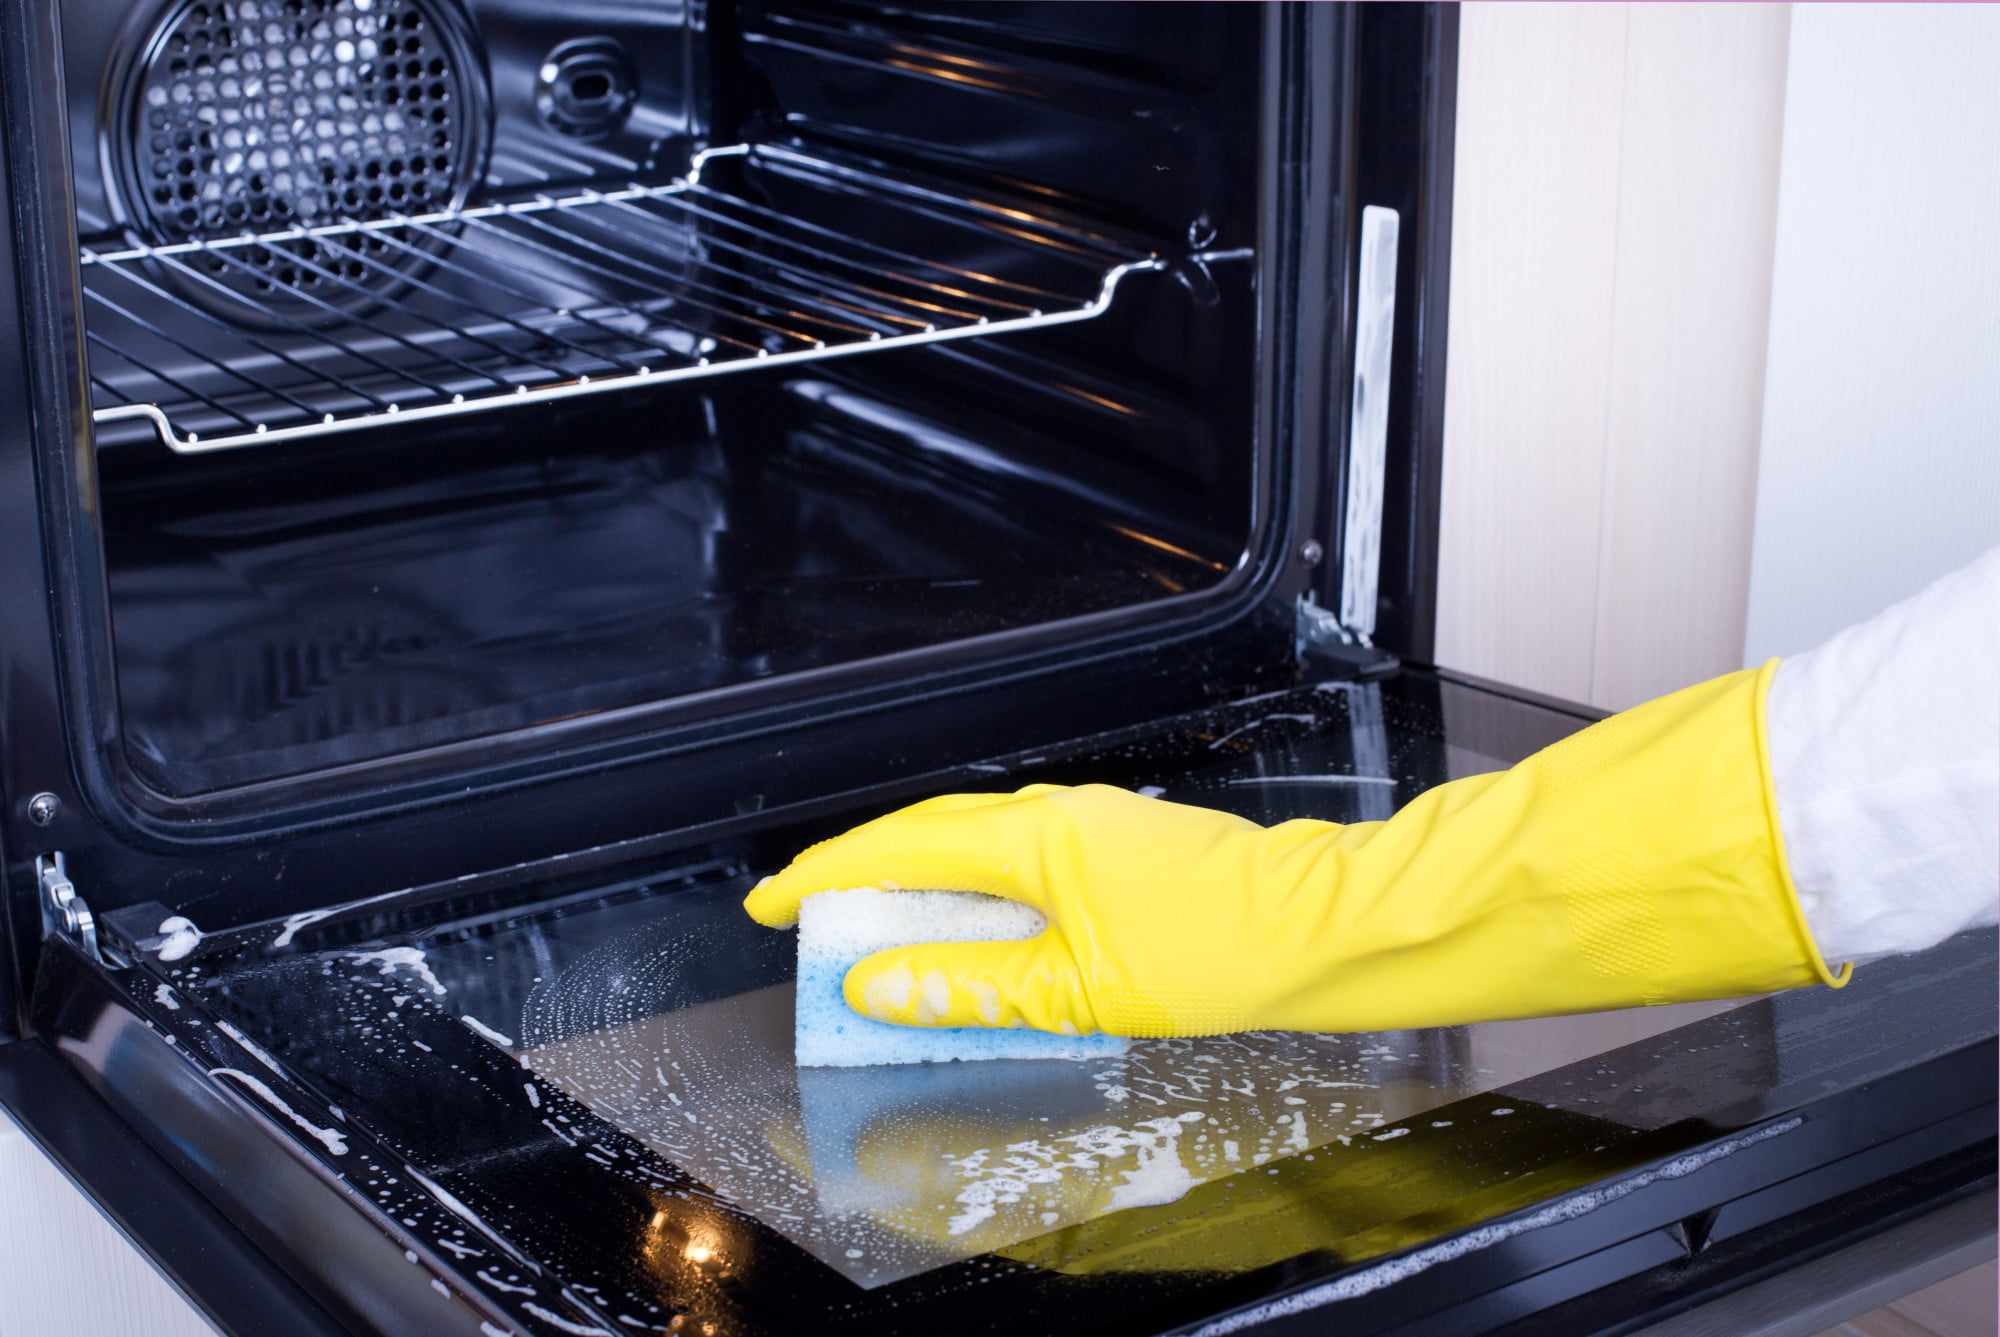 Do you want to know how to clean a toaster oven? Do you have one in your kitchen? Read on to learn how to clean it the right way.